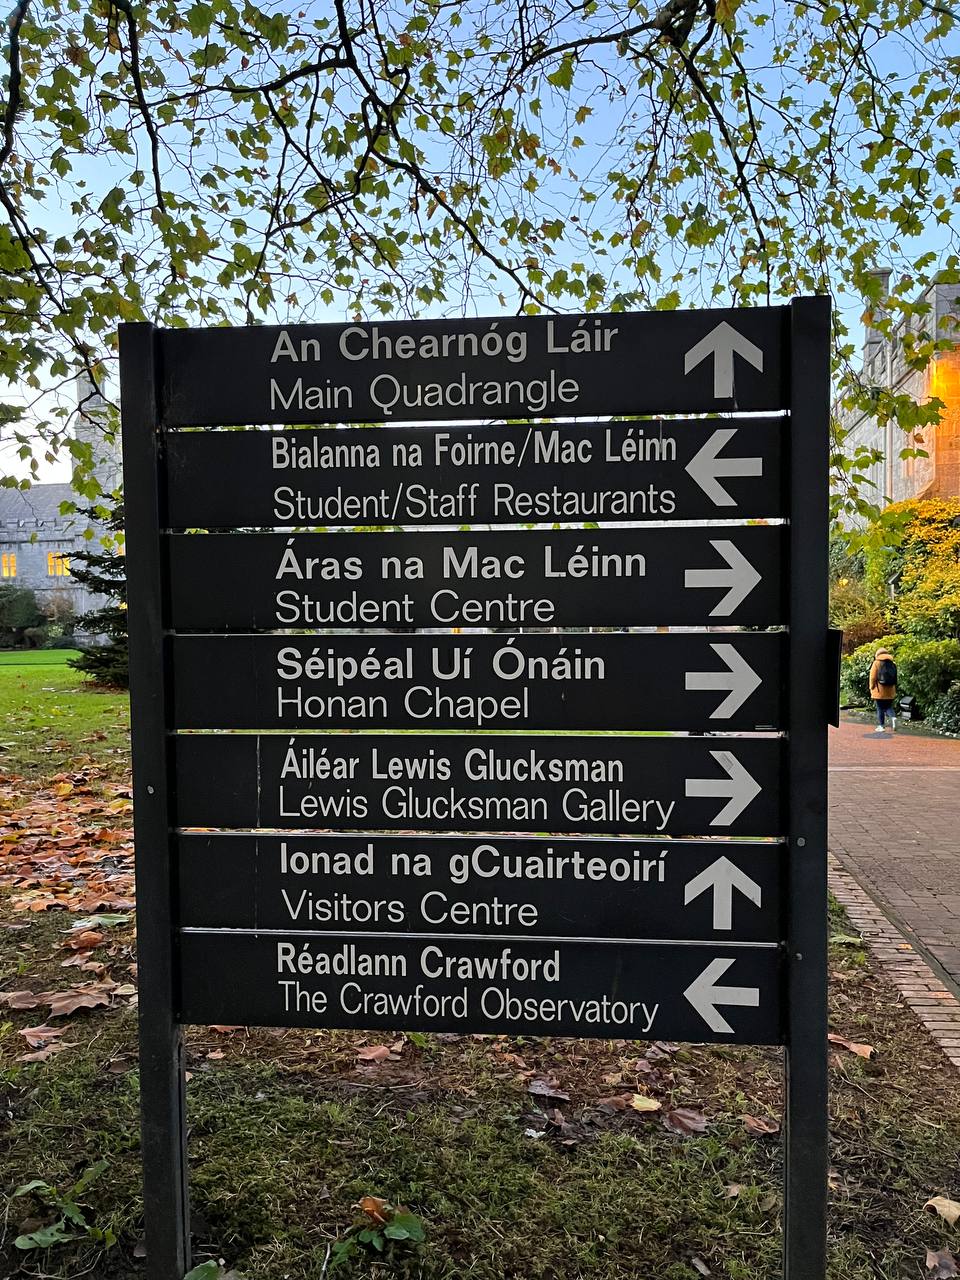 A sign with bilingual directions from the UCC campus